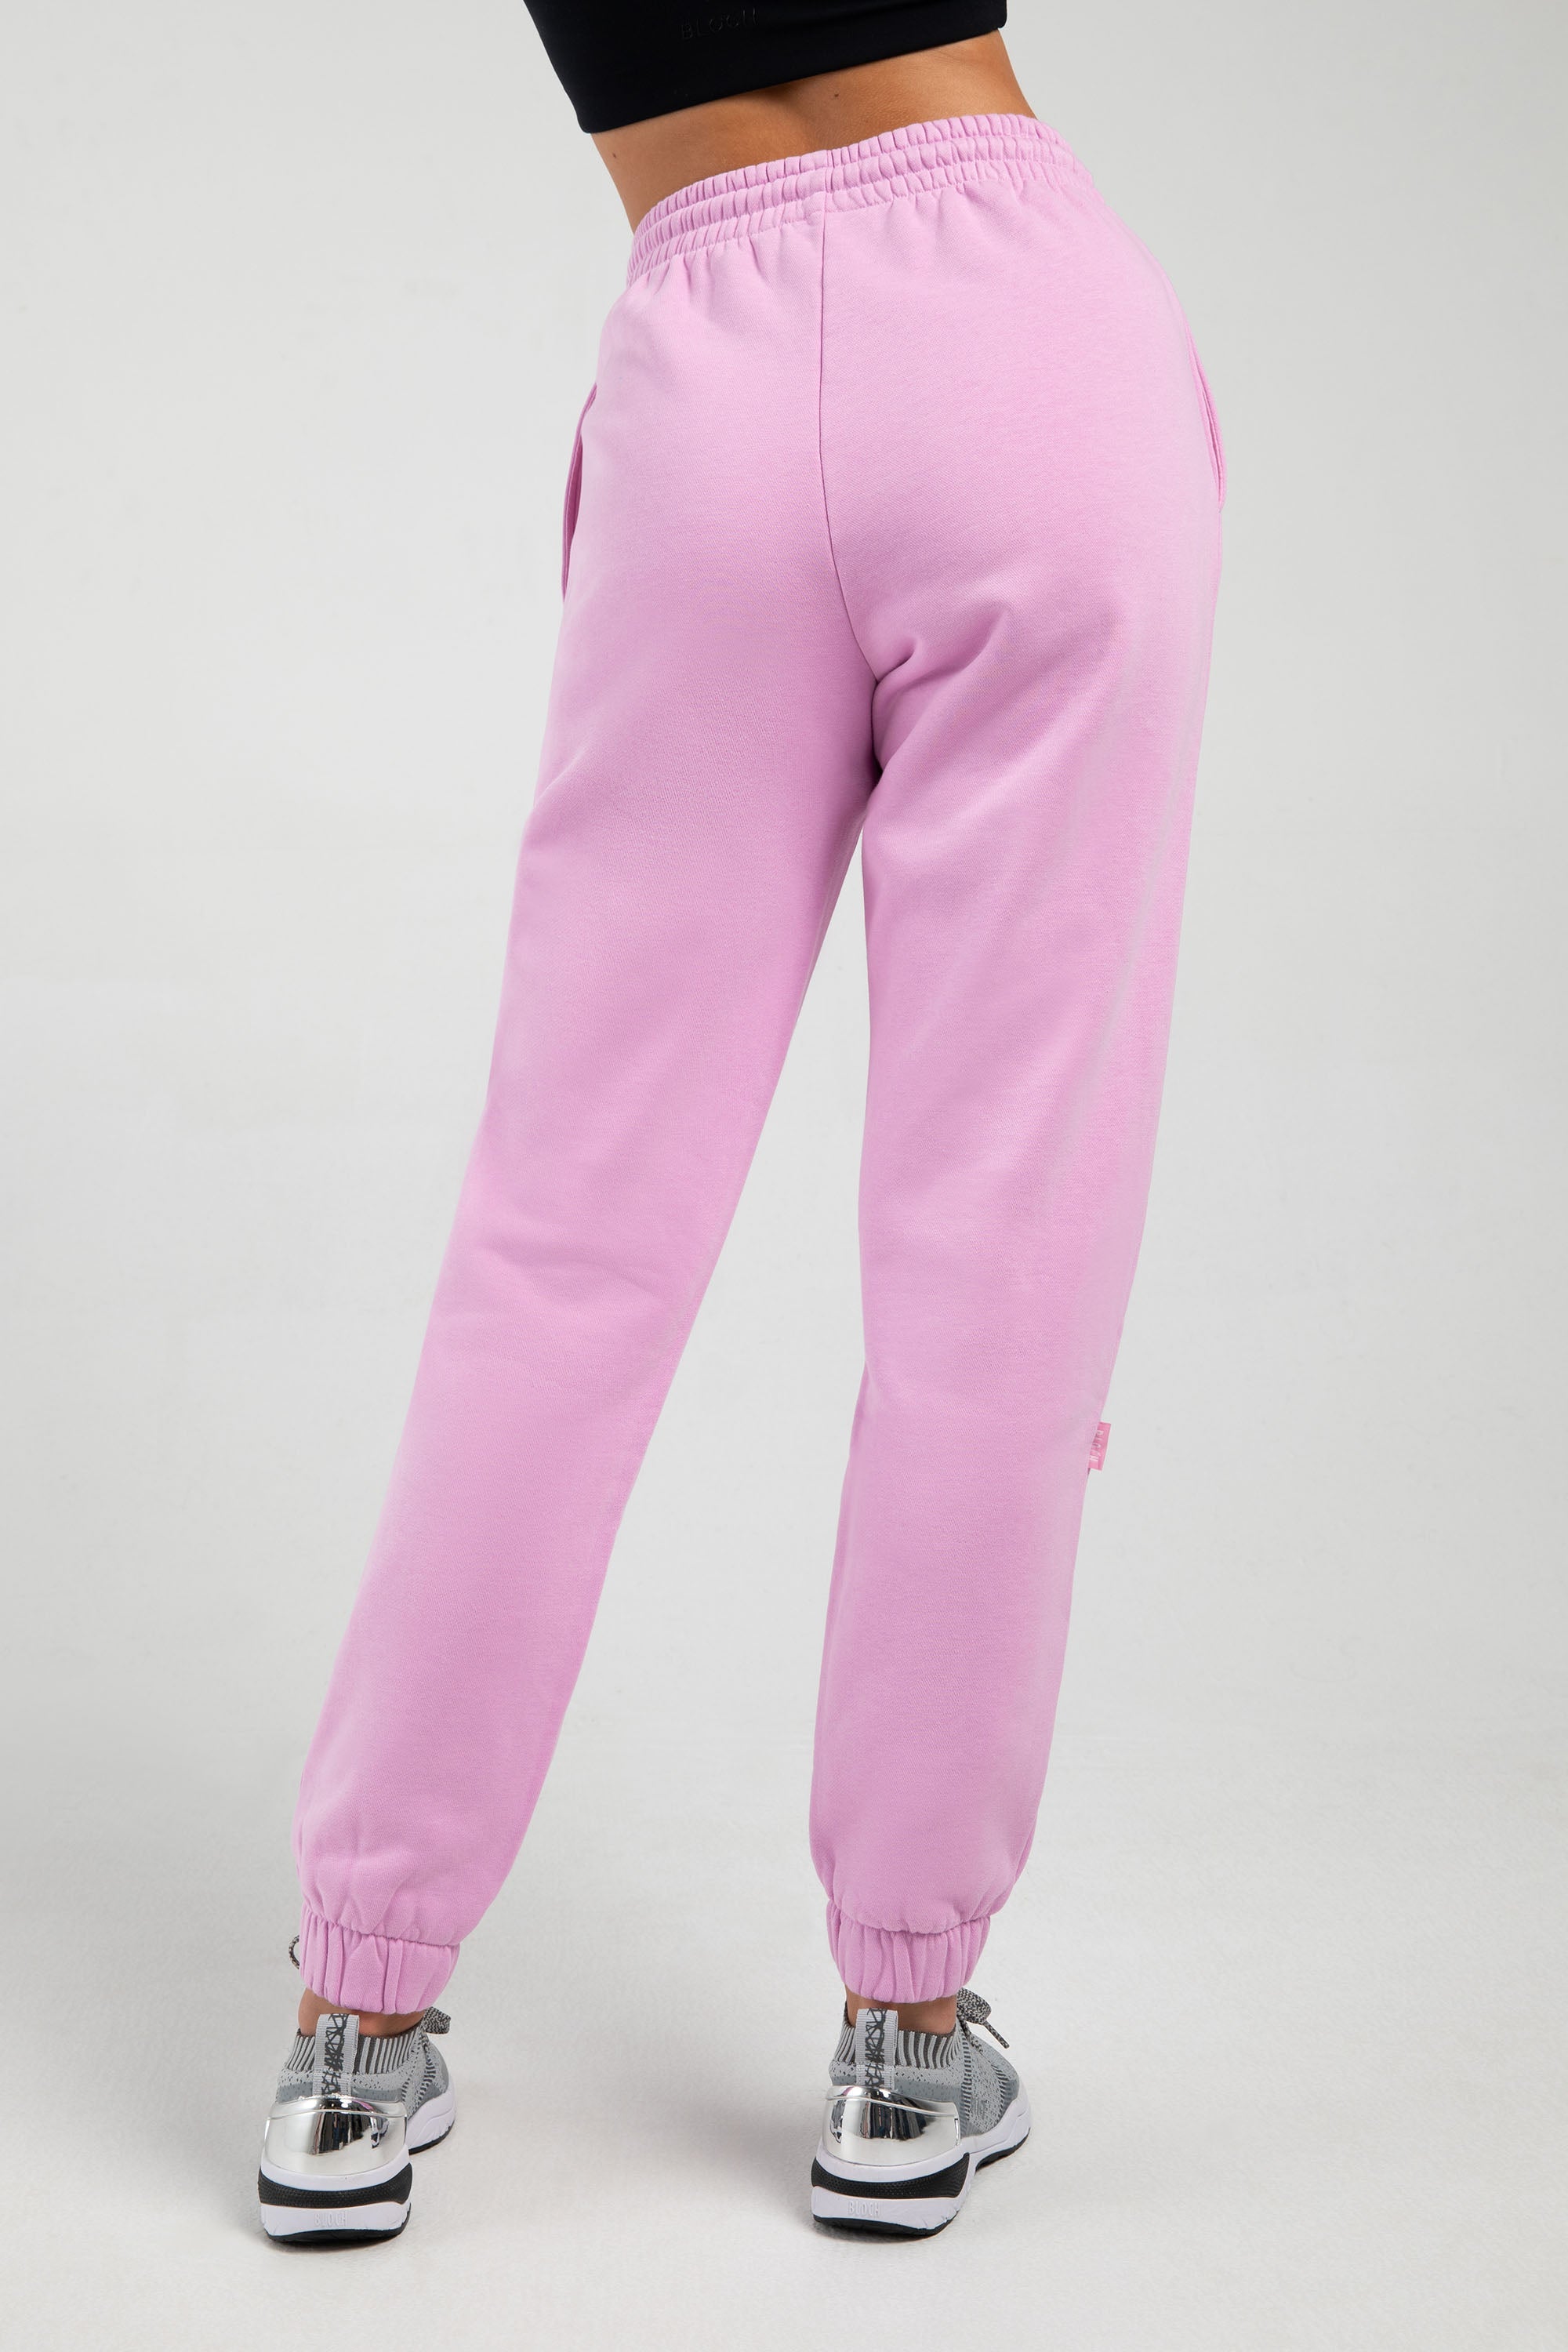 ALL IN MOTION Woman's High-Rise Cotton Blend, Fleece Jogger, Pants, Rose  Pink